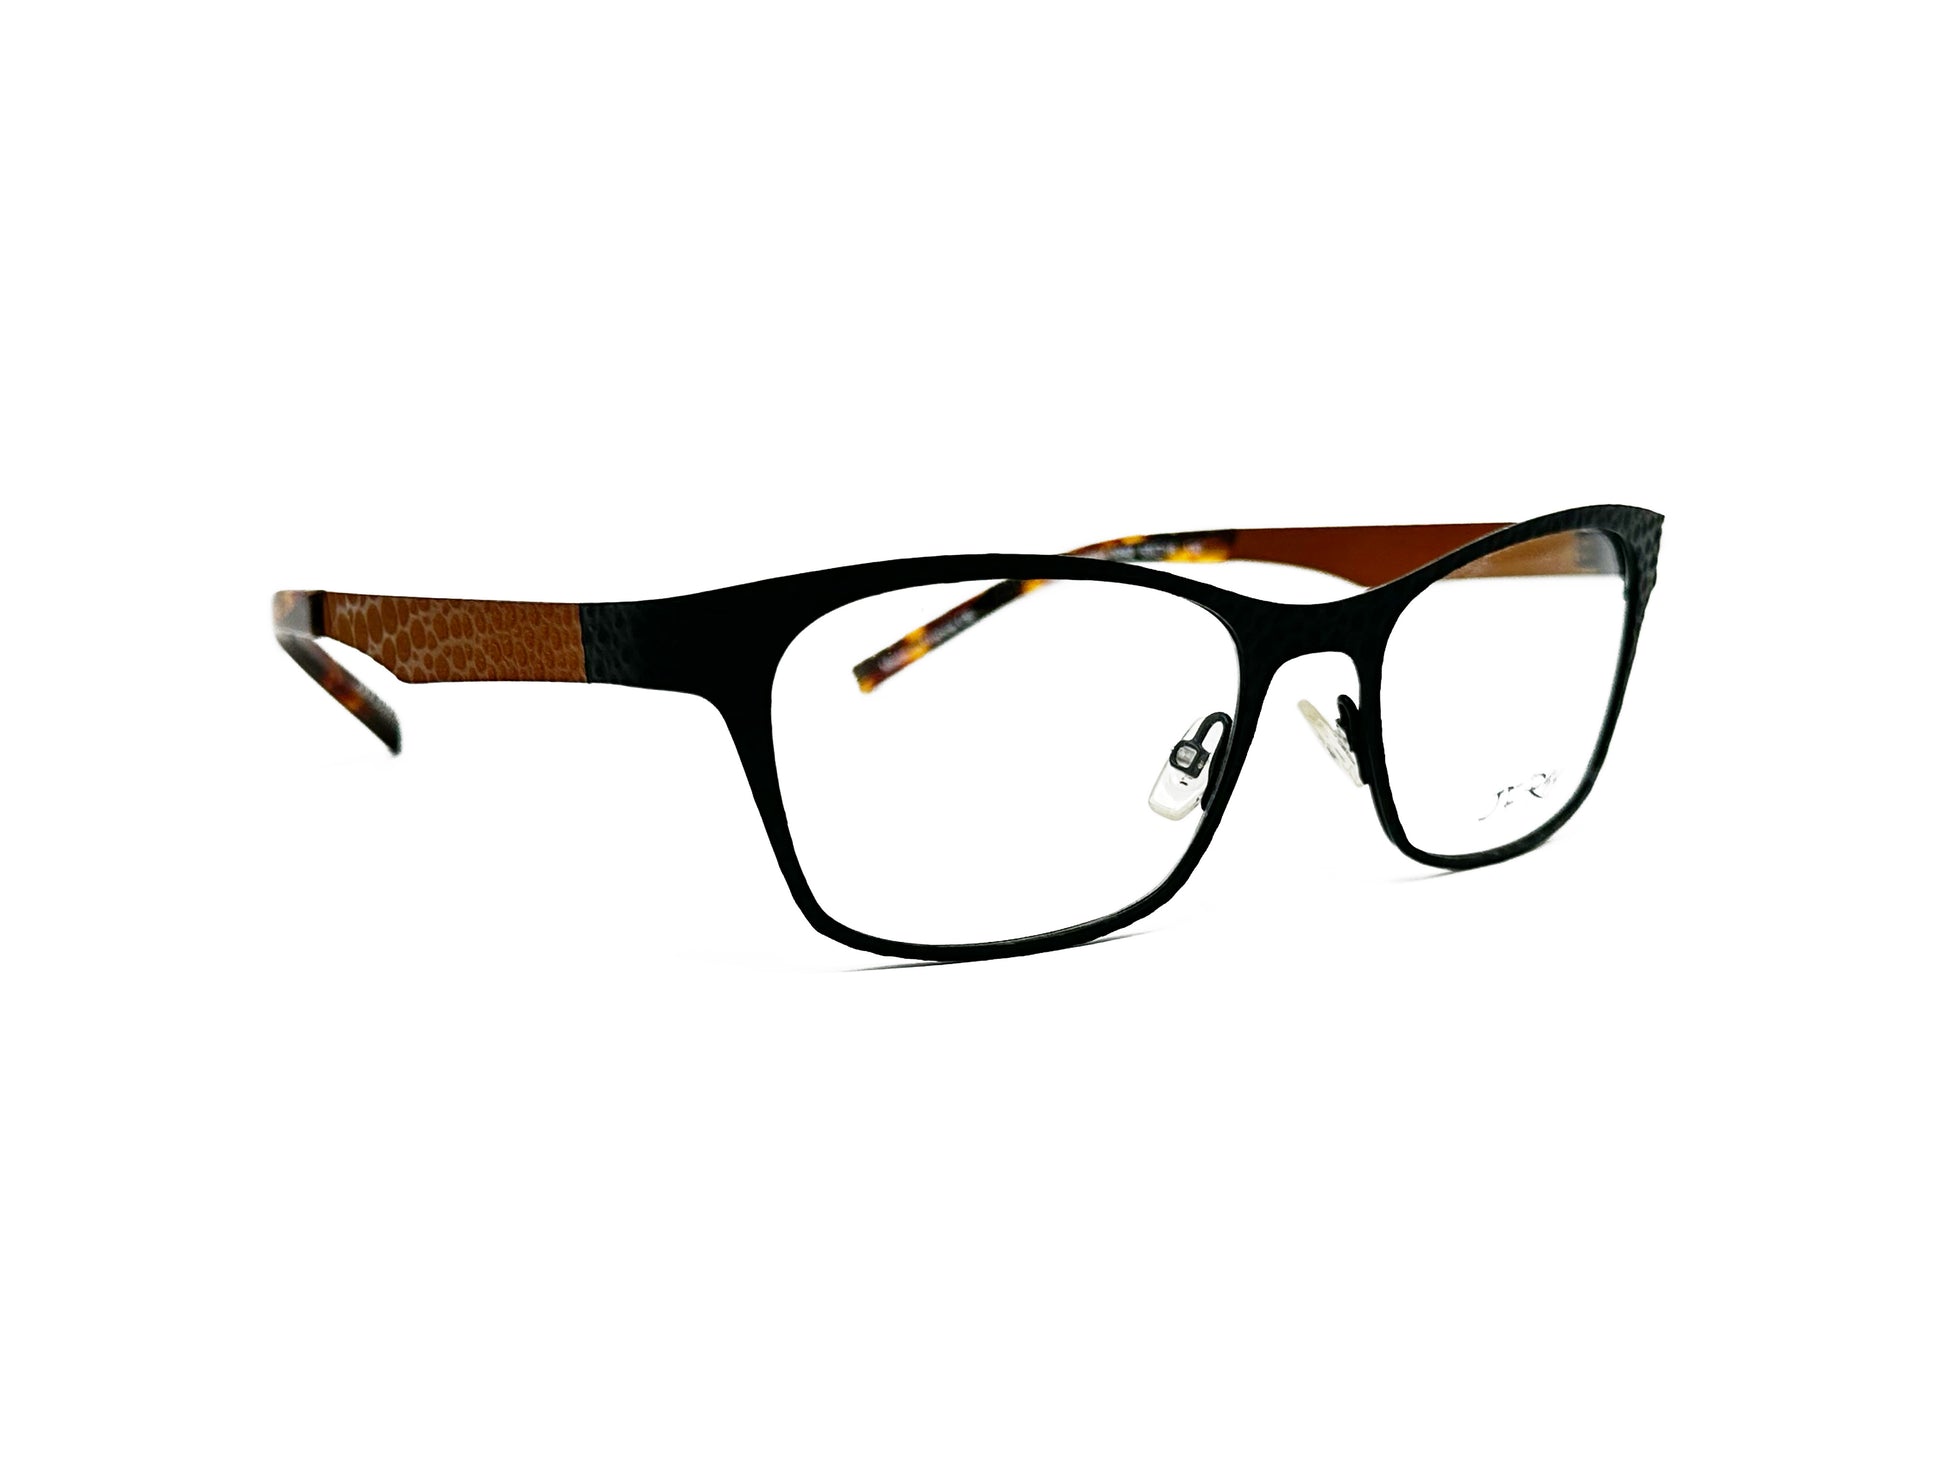 JF Rey rectangular optical frame with an upward angle. Model: JF2604. Color: 0092 - Black with brown temples. Side view.